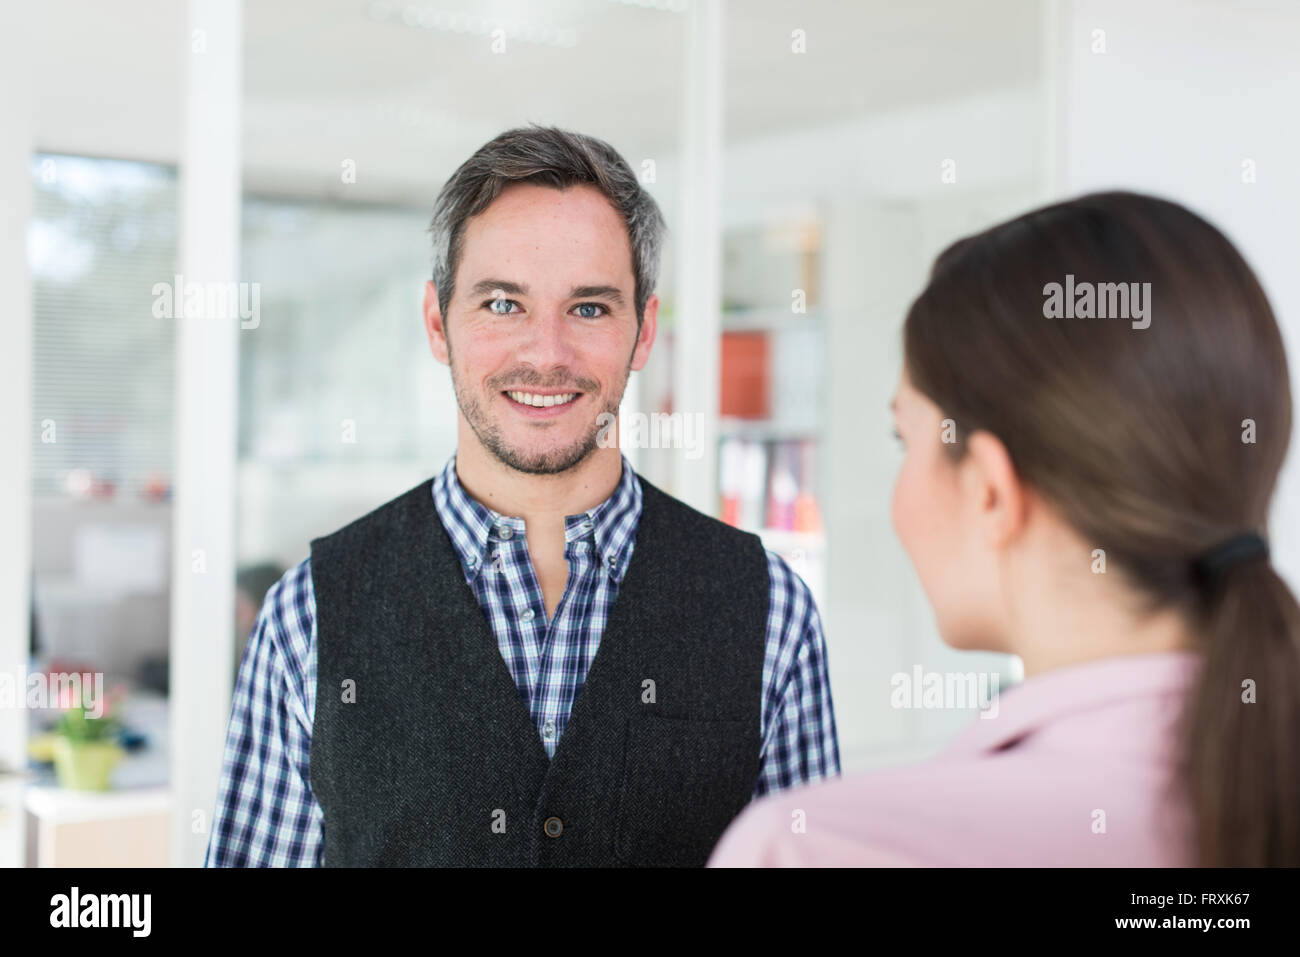 Portrait of a forty years old man with grey hair and beard wearing a checkered blue shirt. A woman with a pink shirt is facing him, focus on the man. They are standing in a luminous open space. Stock Photo